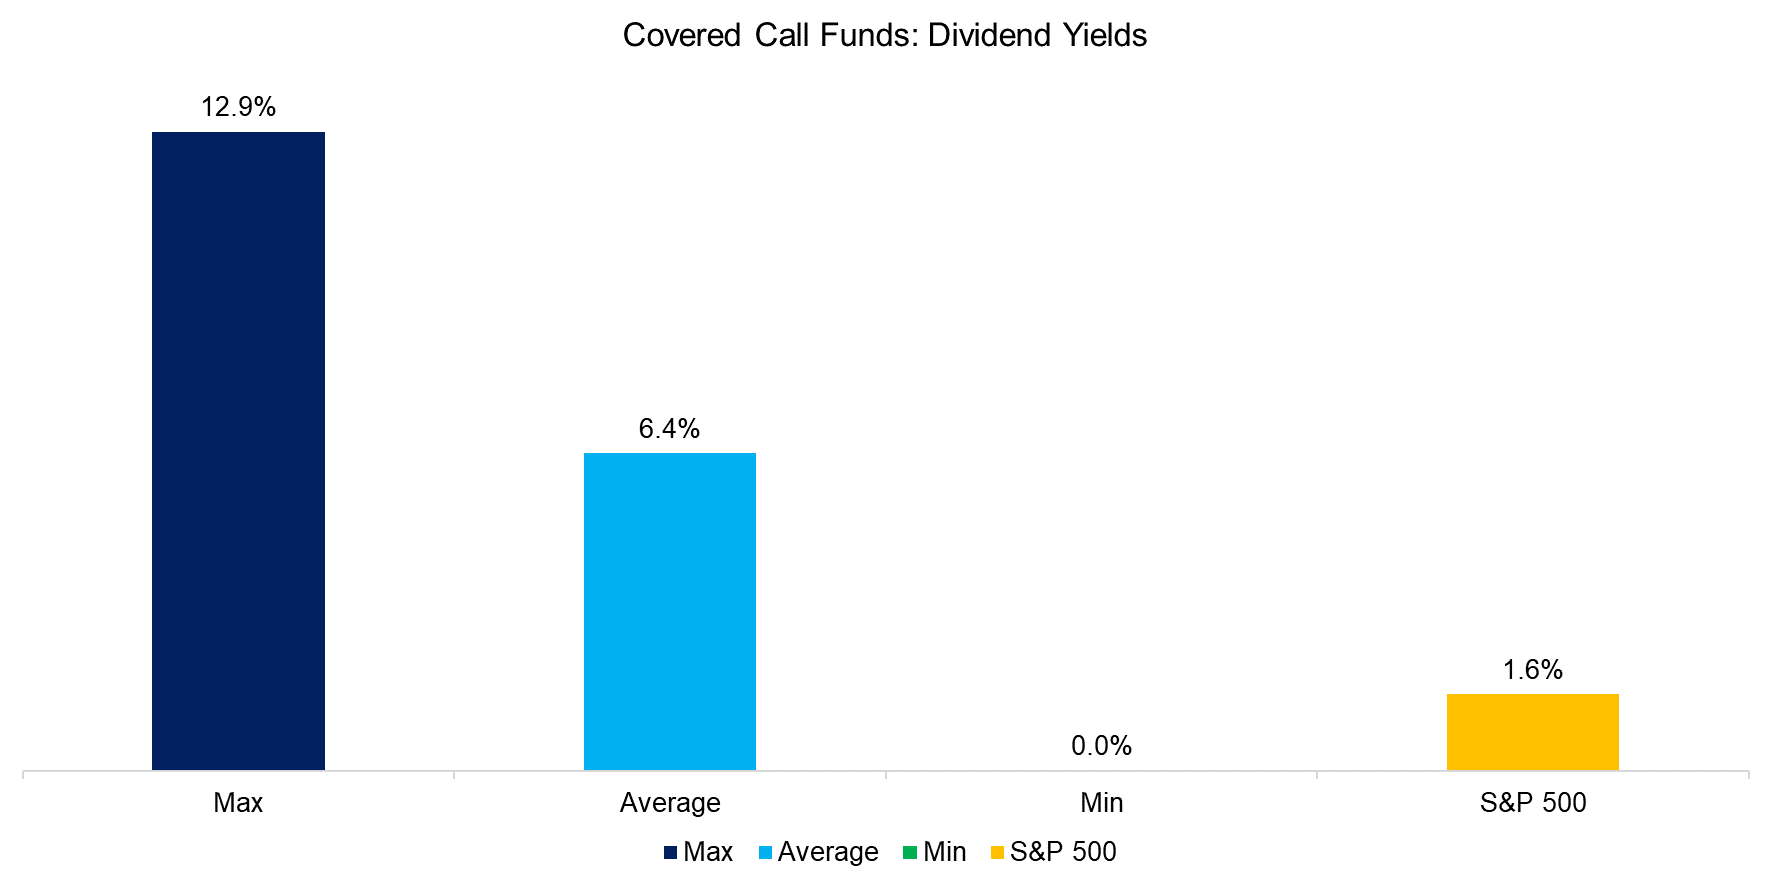 Covered Call Funds Dividend Yields